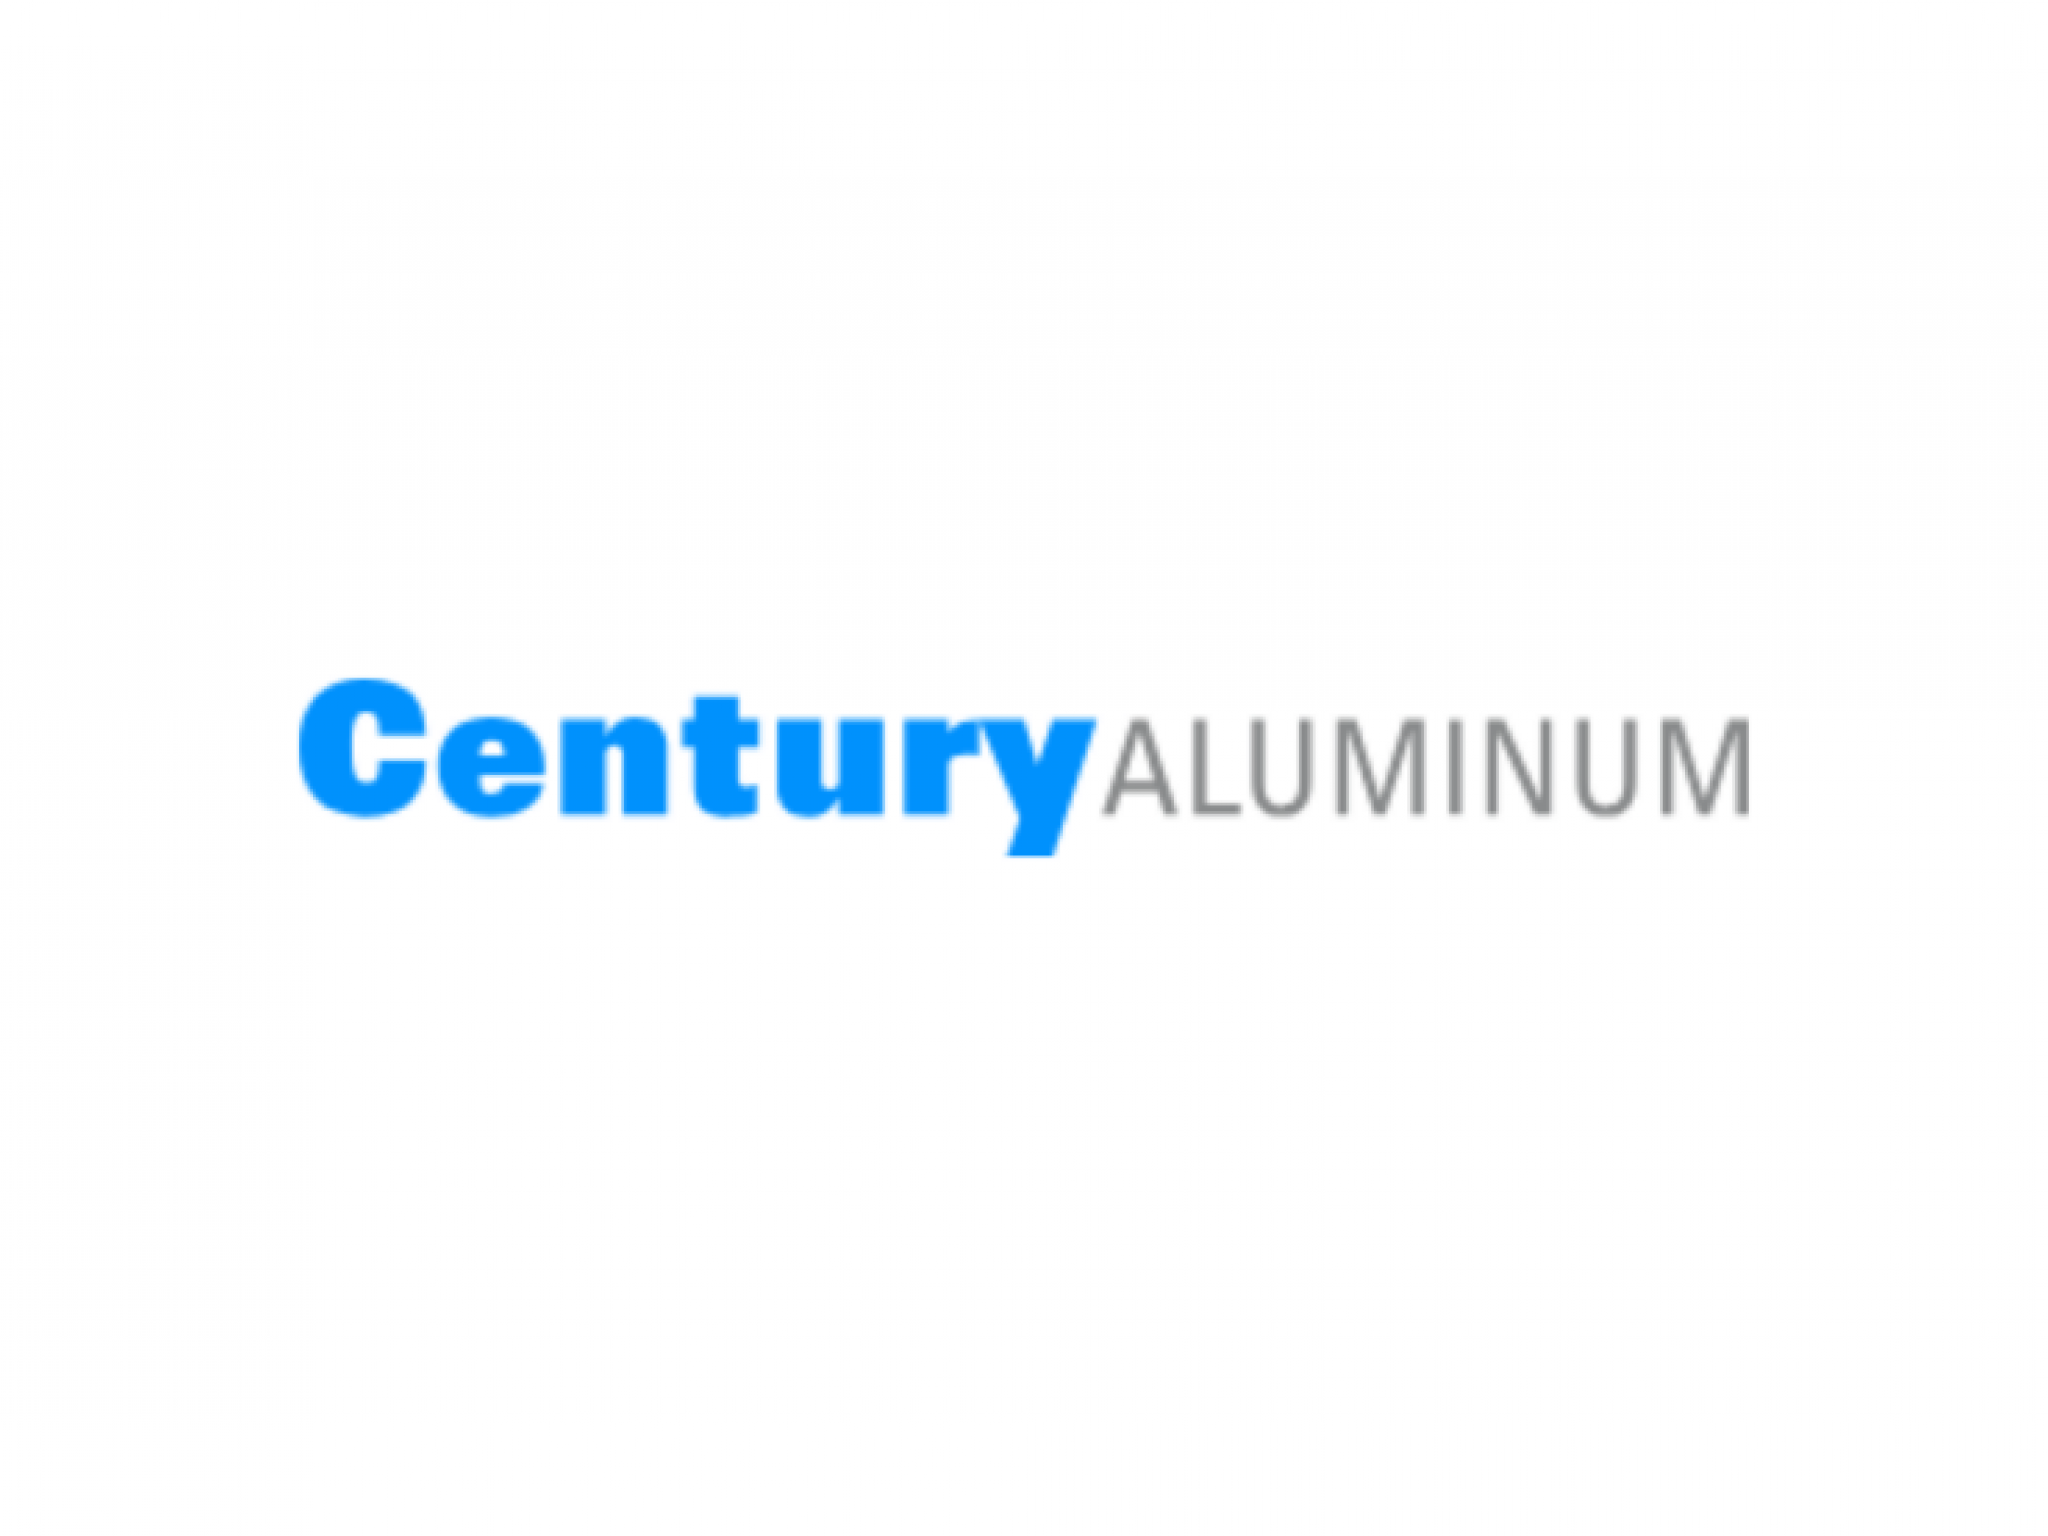  century-aluminums-production-leap-500m-boost-to-forge-the-first-new-us-primary-aluminum-smelter-in-45-years 